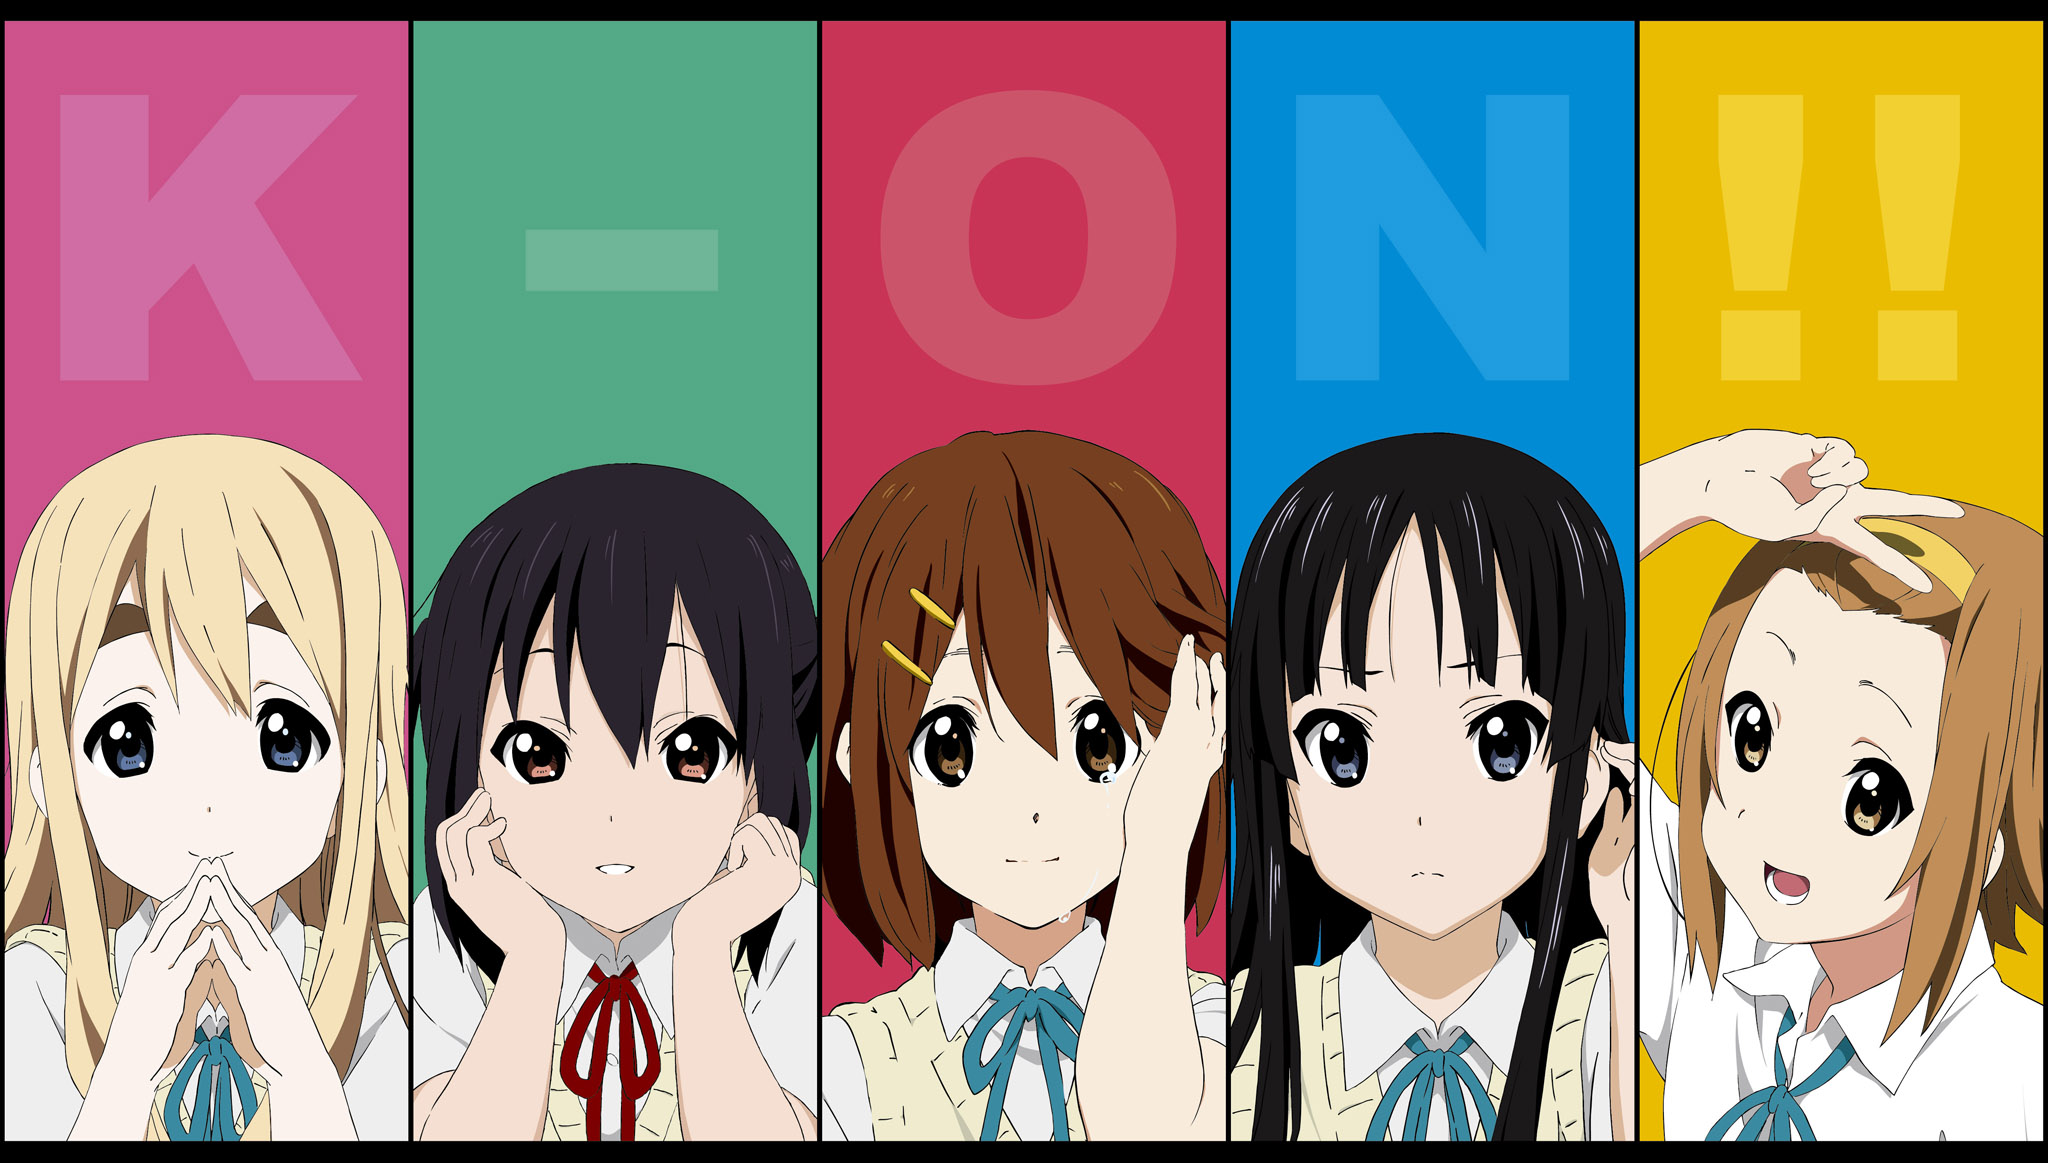 K-On! Analysis – In The Life of College